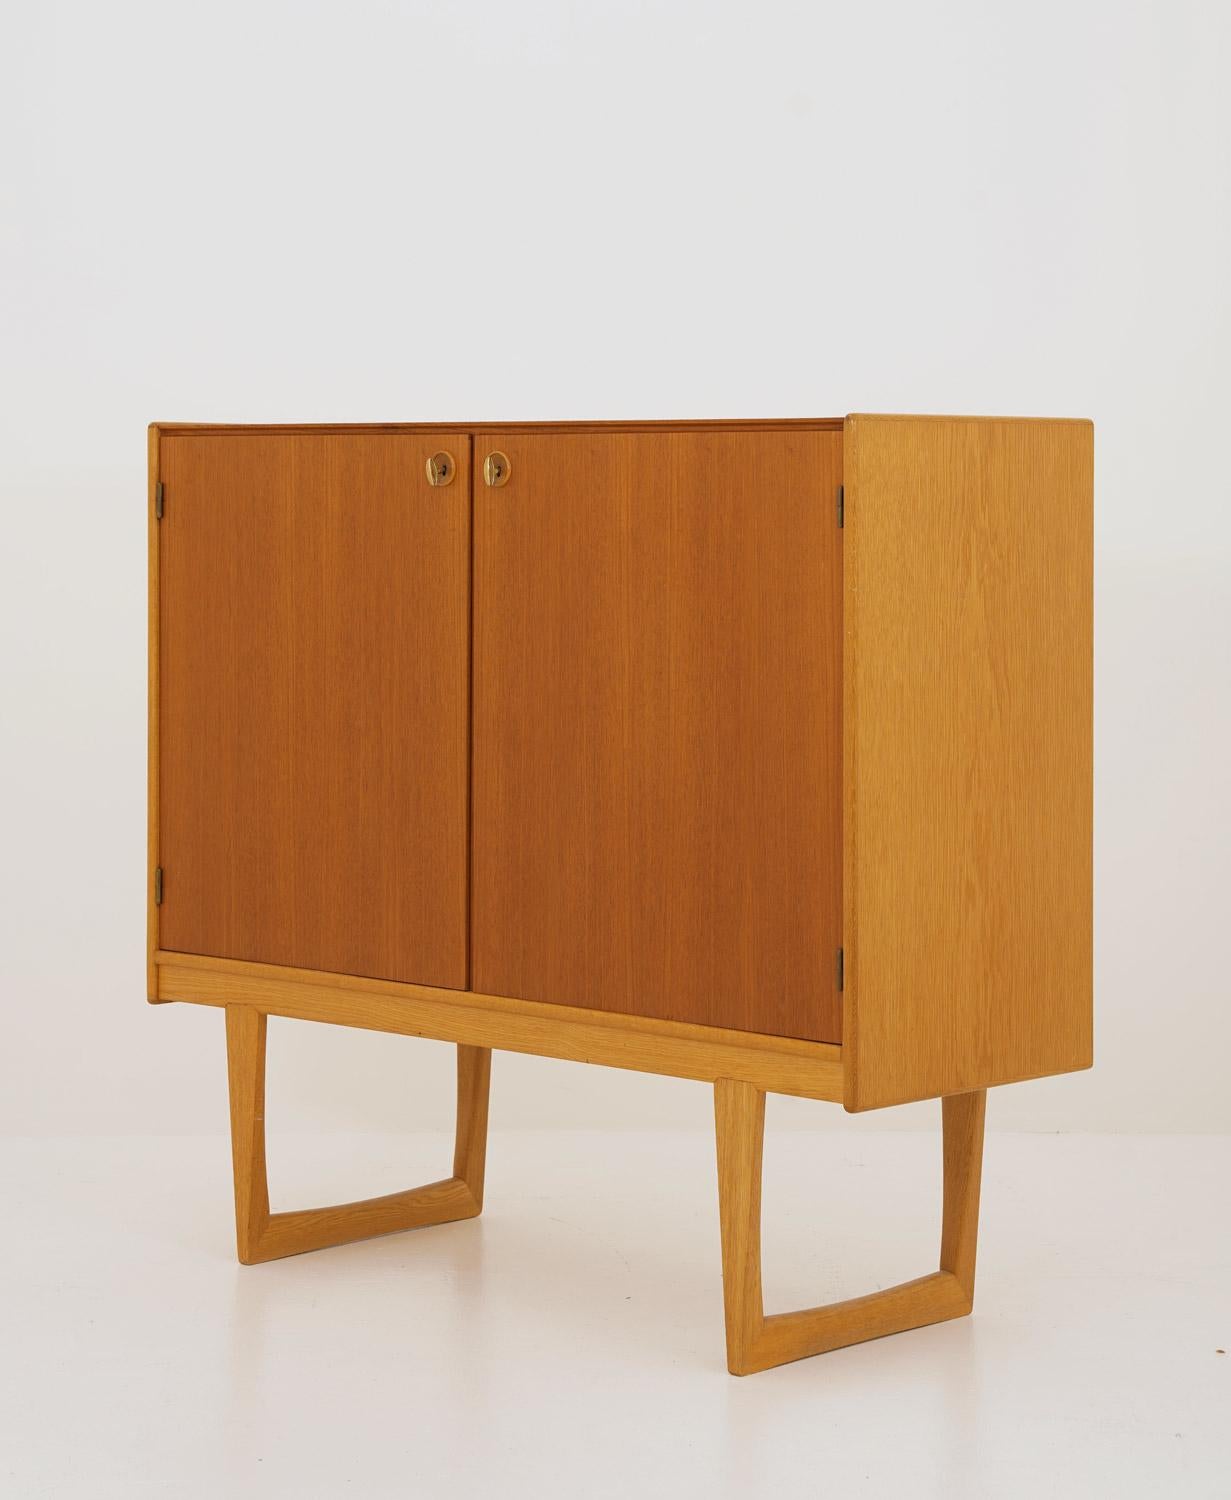 Elegant and minimalistic cabinet by Yngvar Sandström for Nordiska Kompaniet (NK). The cabinet features two doors in teak with original brass keys. The legs and the sides are made of oak, creating a beautiful contrast between the different types of